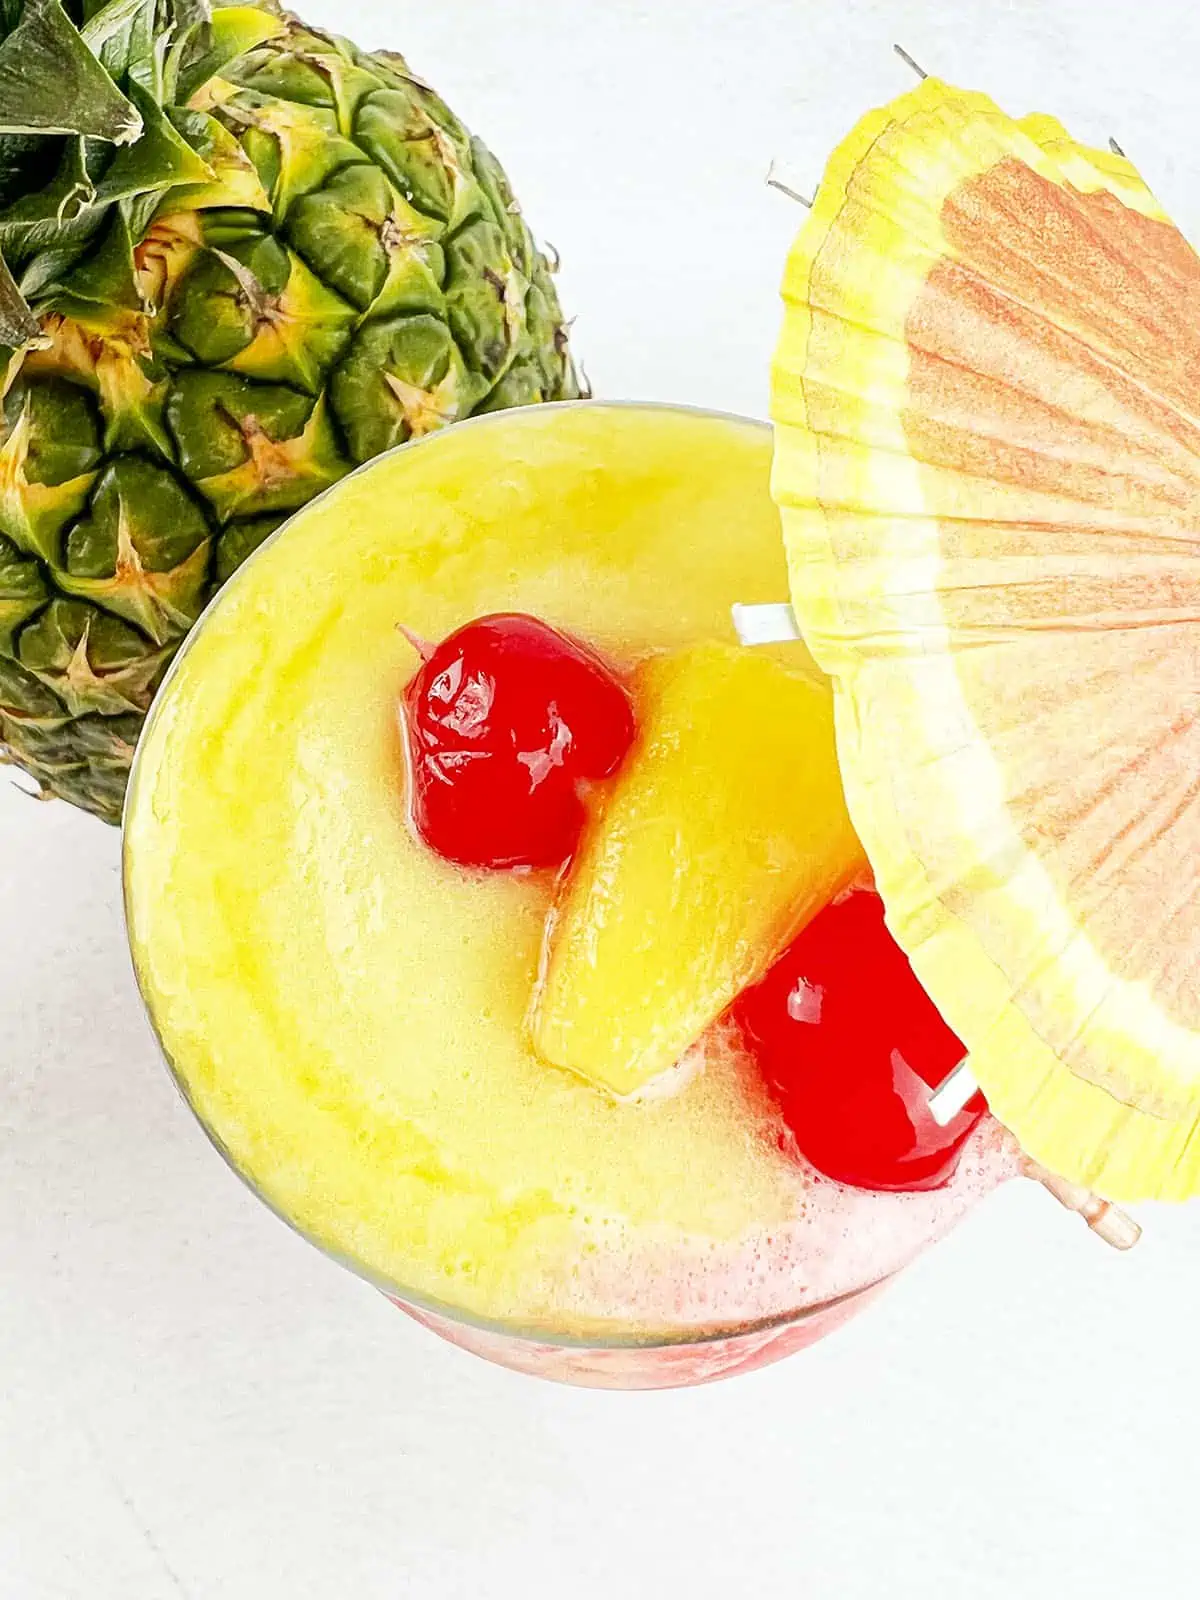 A top down image of the fruity slush drink with two cherries and a pineapple piece on top.